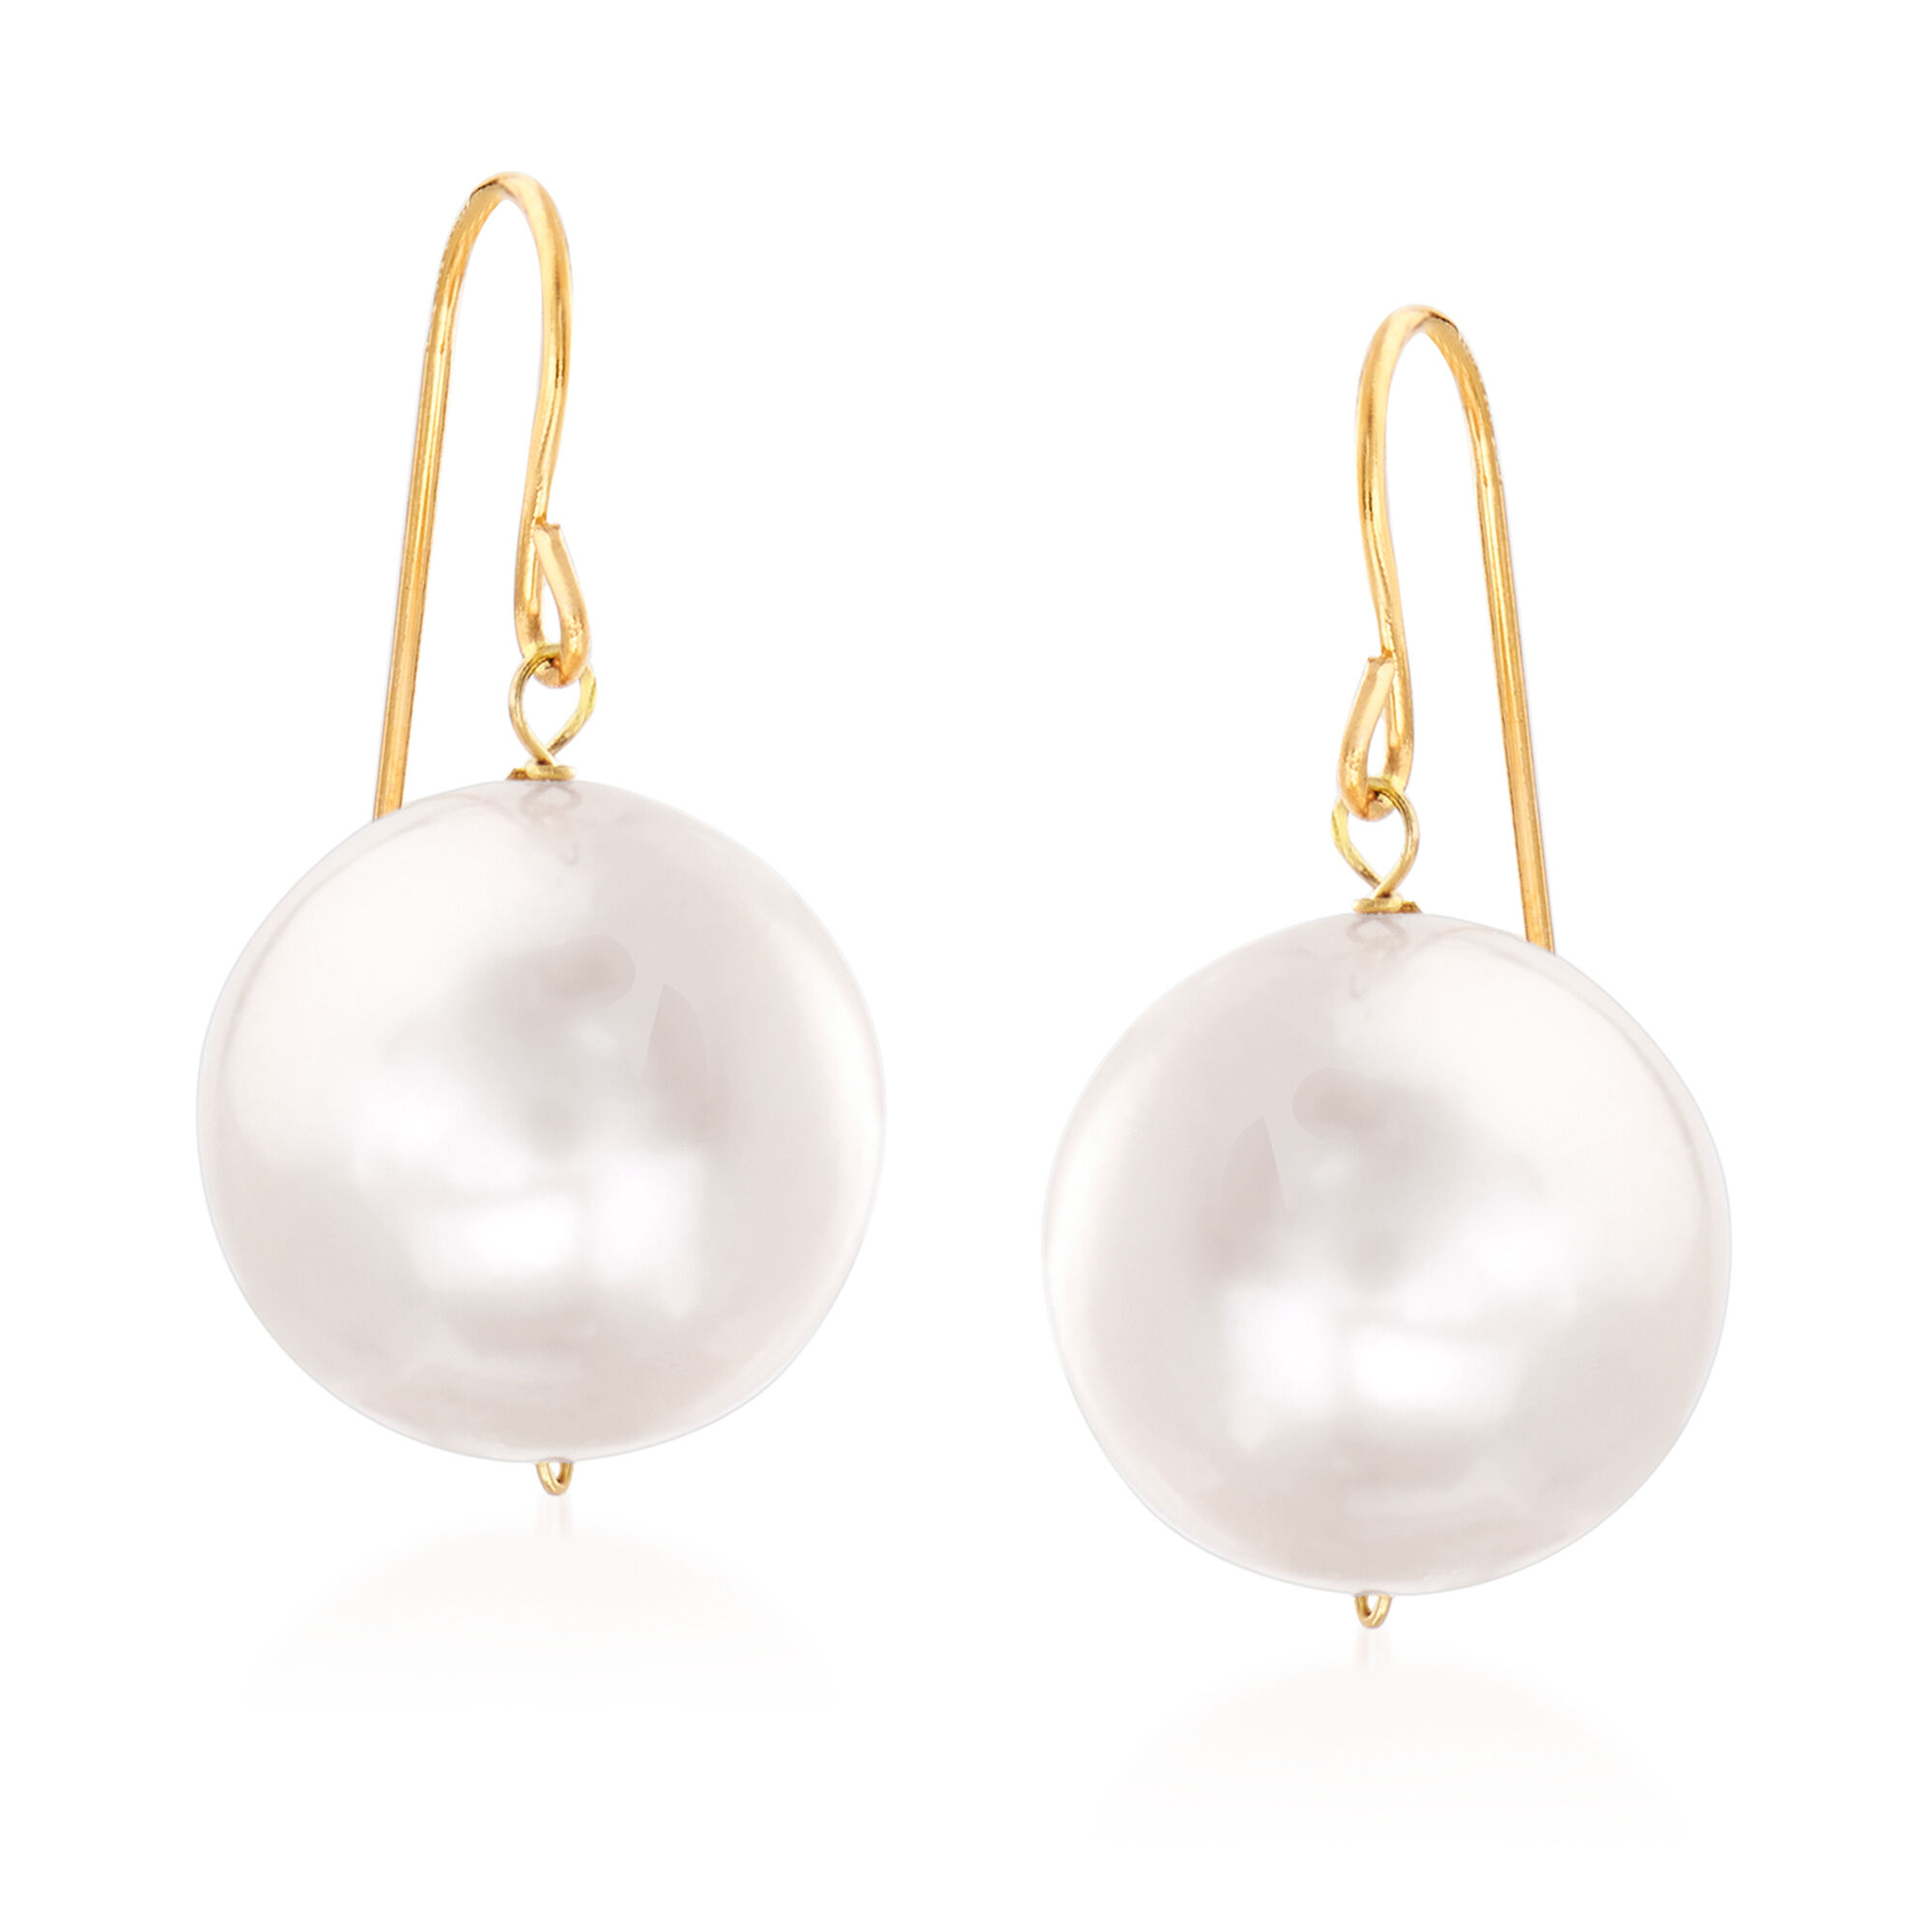 11mm Cultured Pearl Drop Earrings in 14kt Yellow Gold